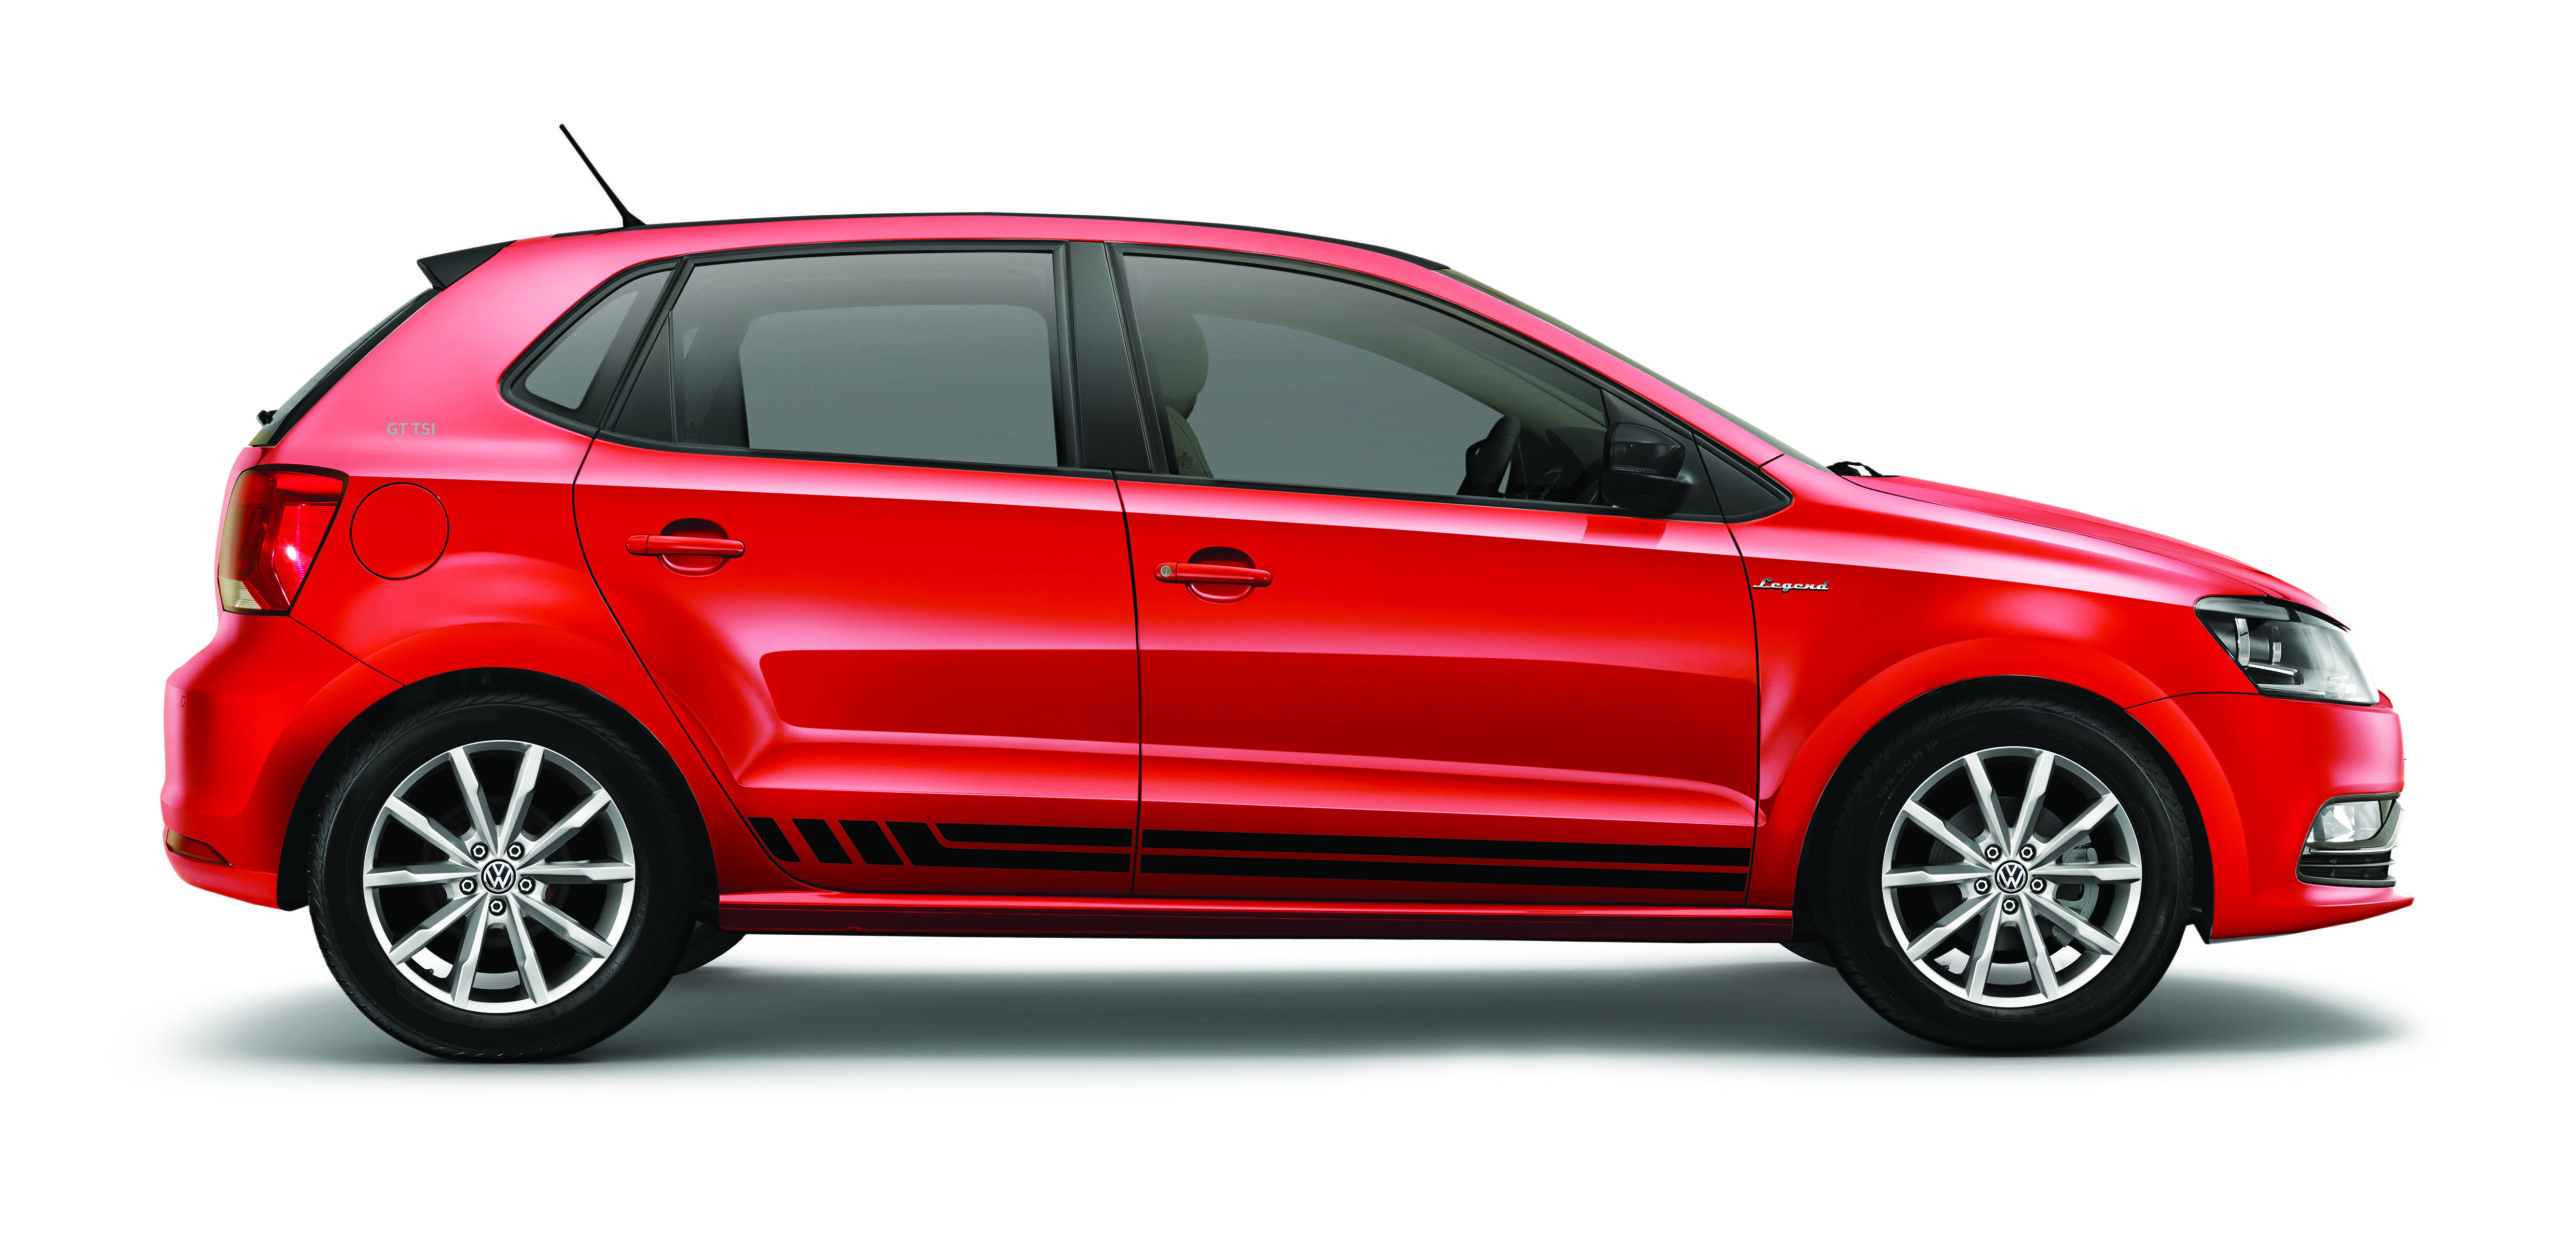 Volkswagen Polo Legend Edition Is Celebrating The Last Few Variants (1)